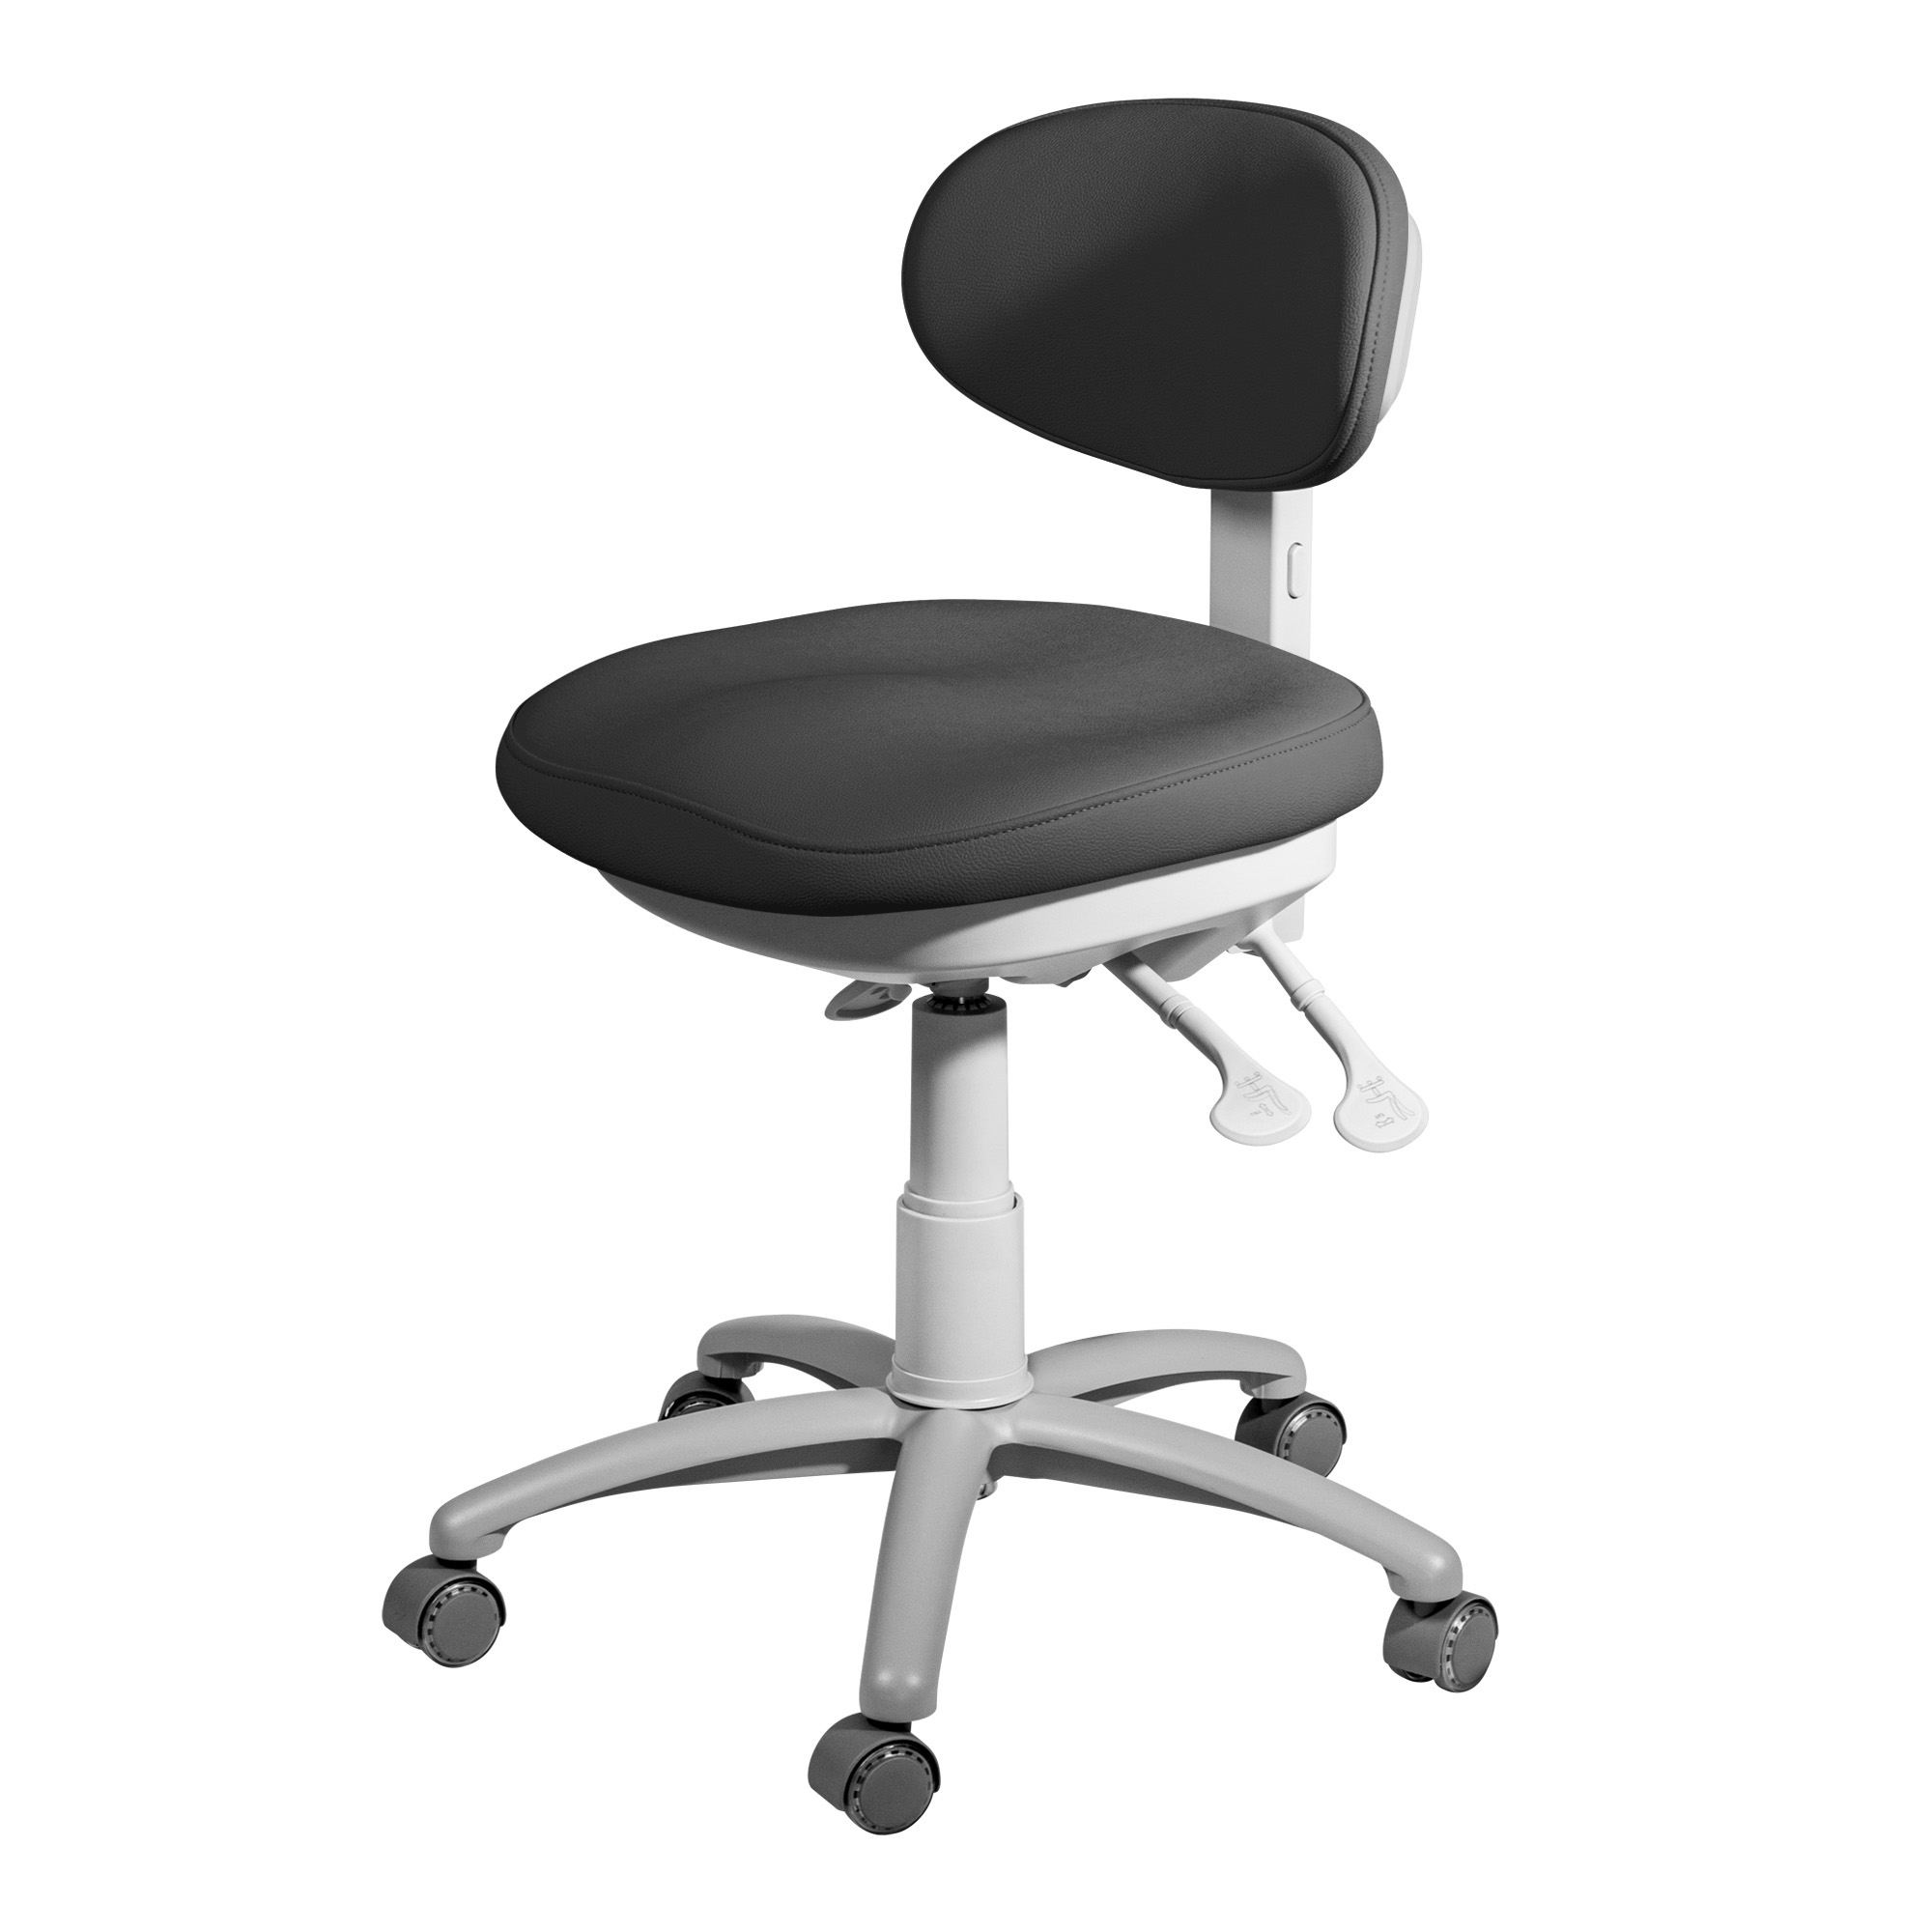 Moon - Professional chair with ergonomic seat and backrest